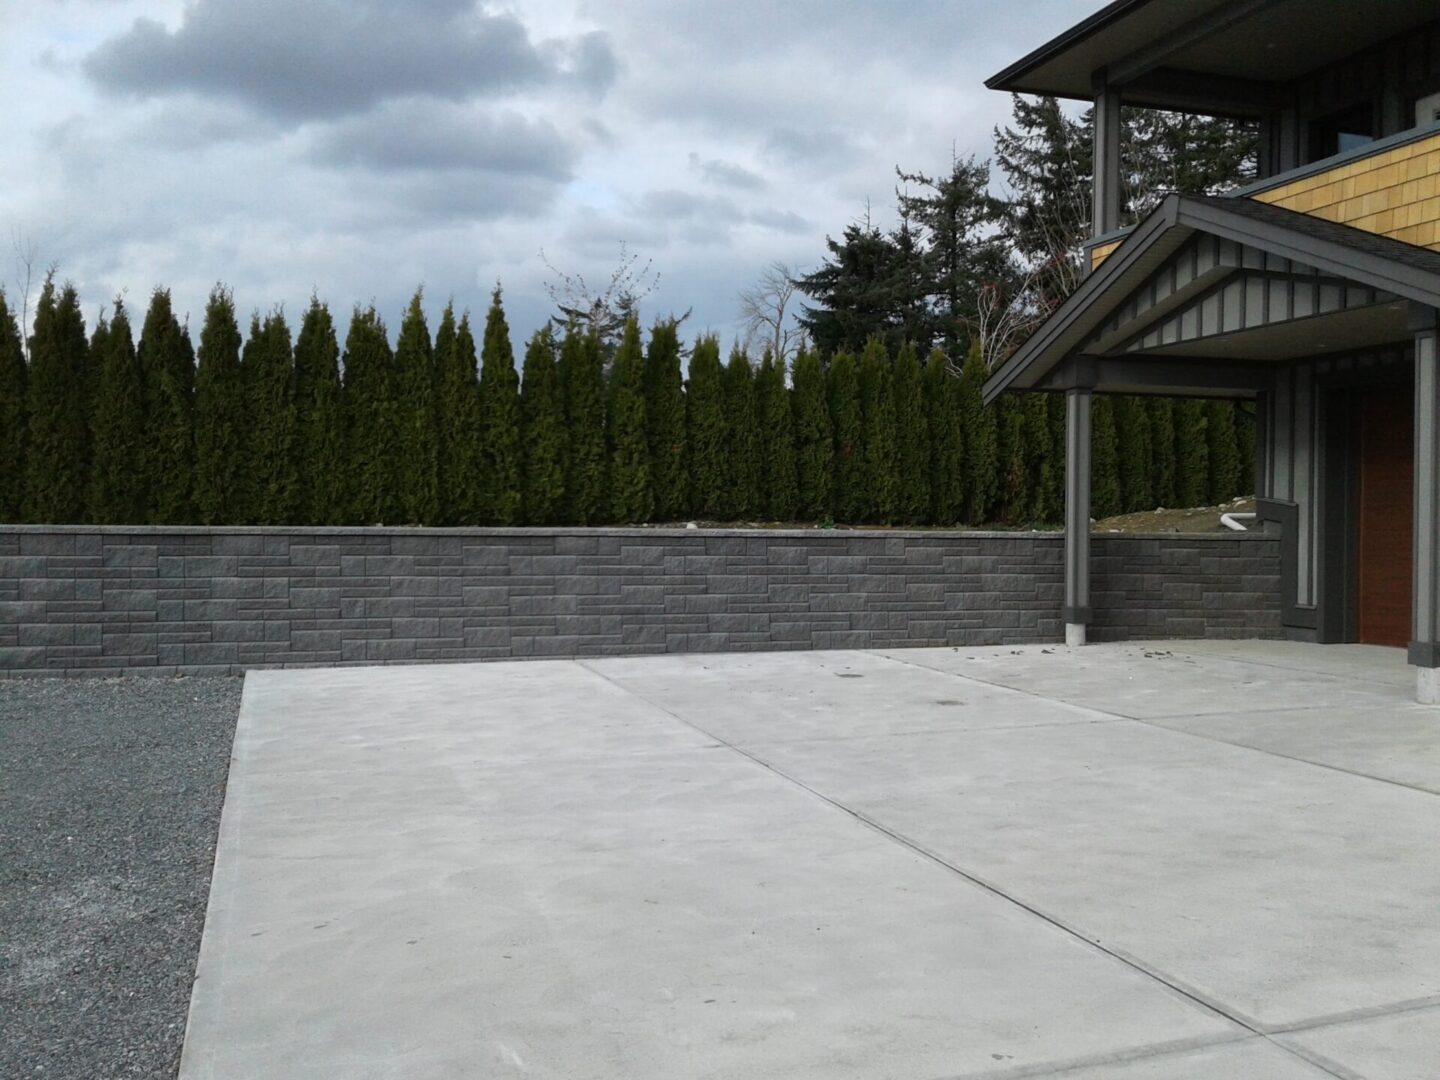 A wide driveway leading to a modern house with a gray stone wall and a row of tall, narrow evergreen trees under a cloudy sky.